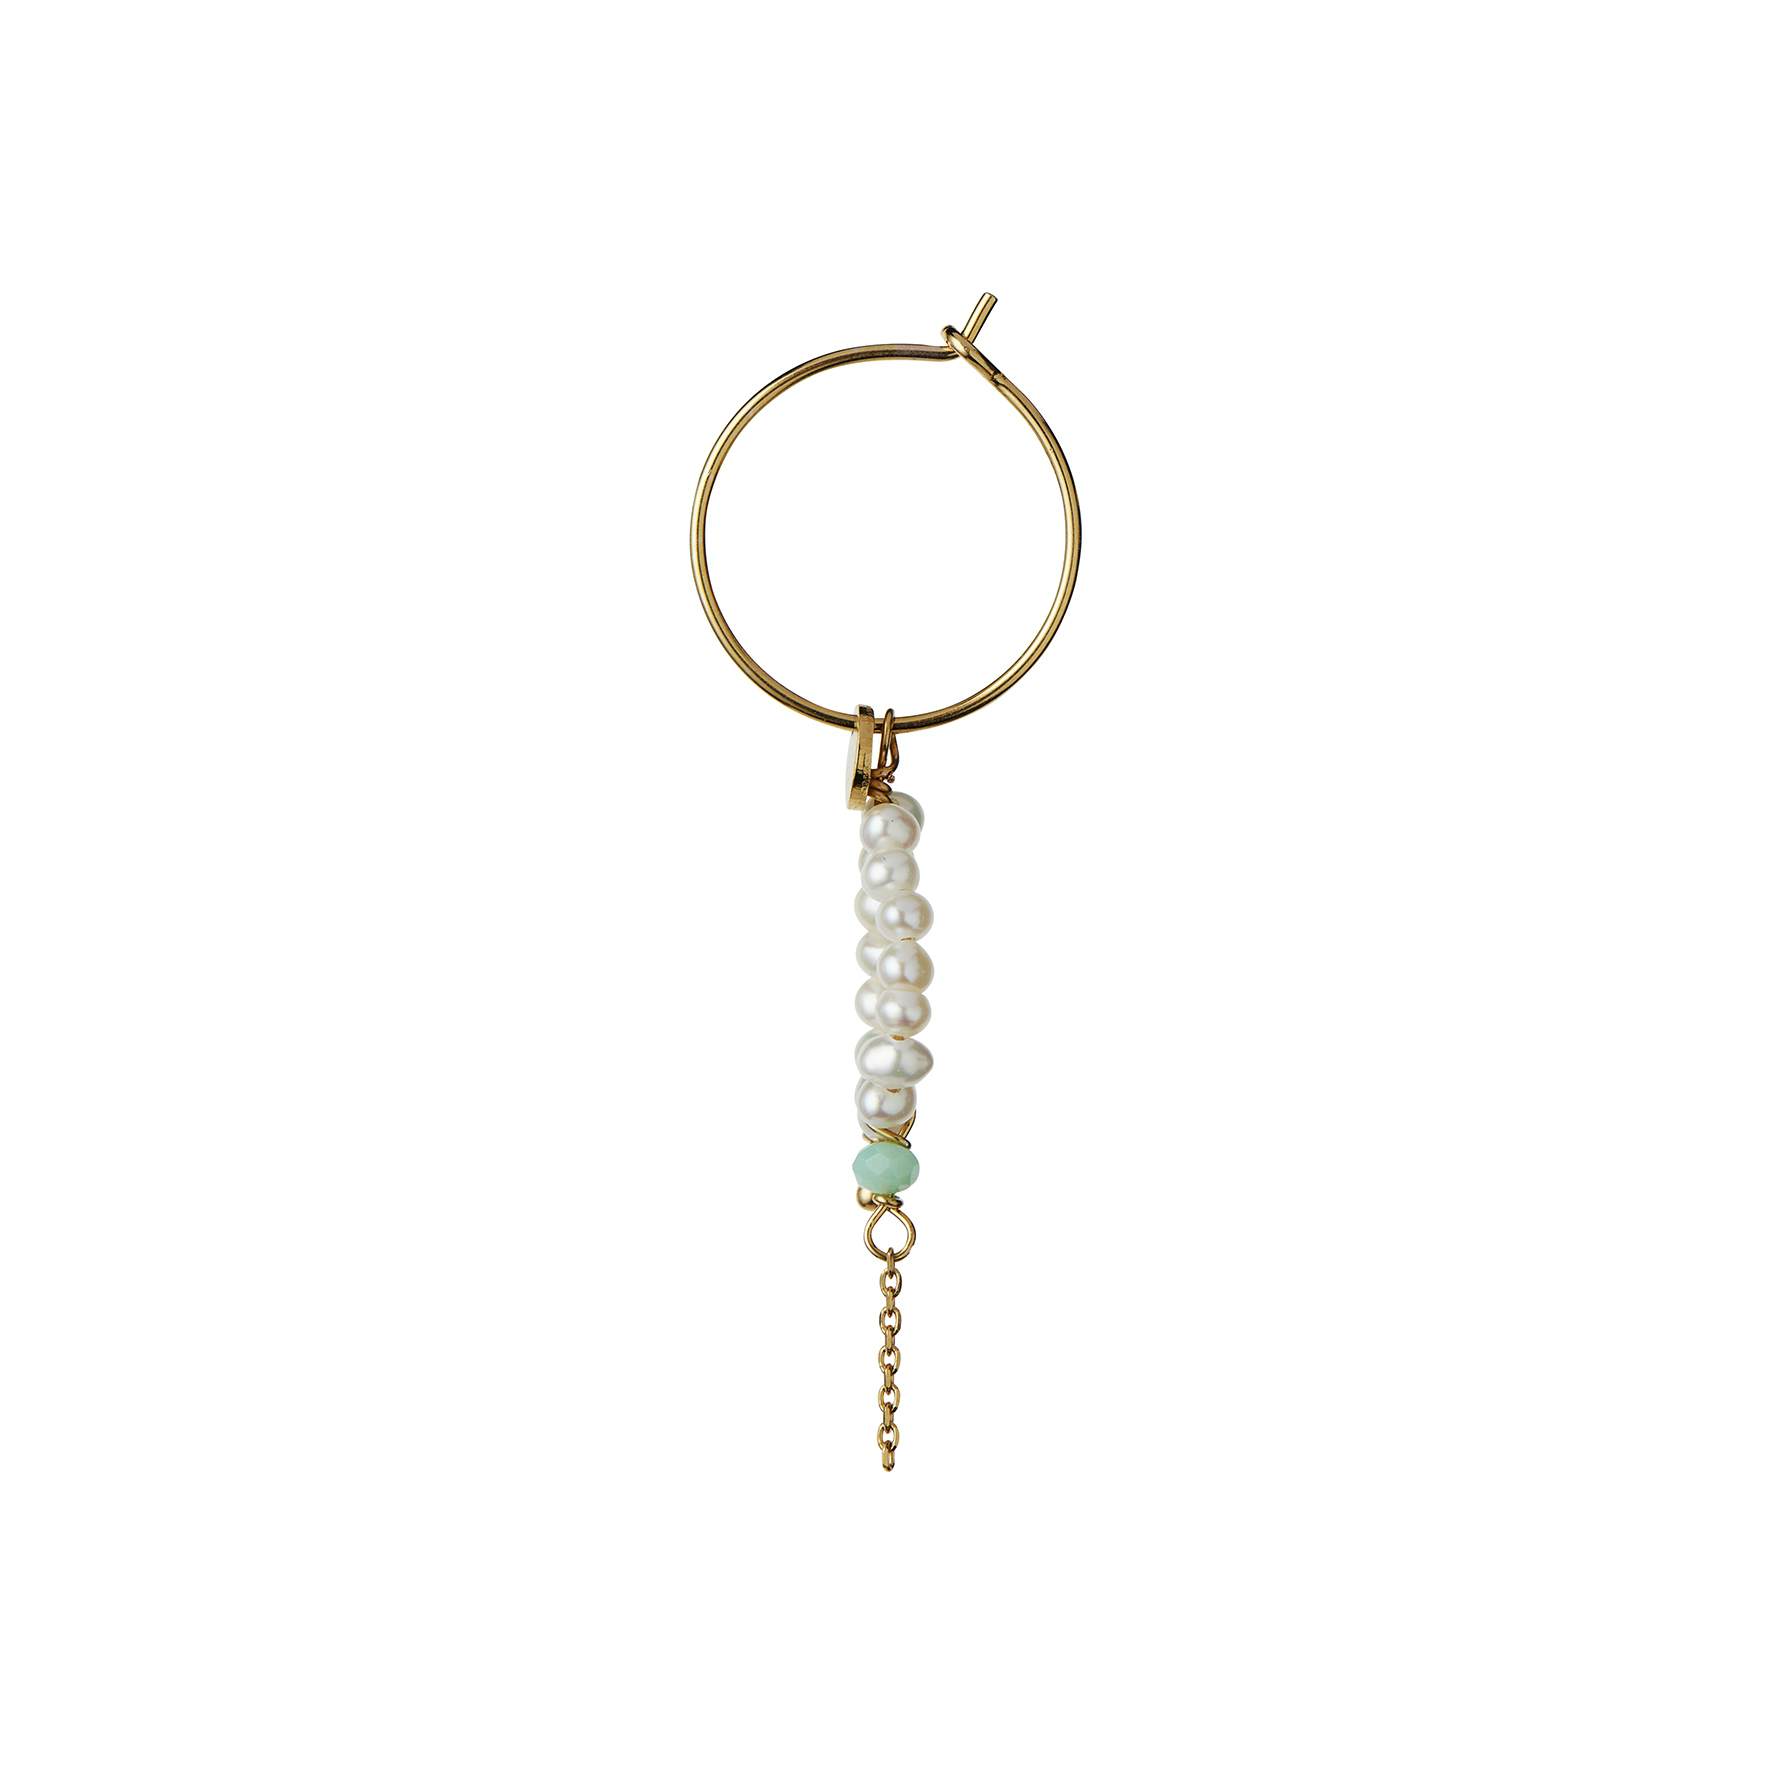 Heavenly Pearl Dream Hoop Green Stone & Chain from STINE A Jewelry in Goldplated-Silver Sterling 925